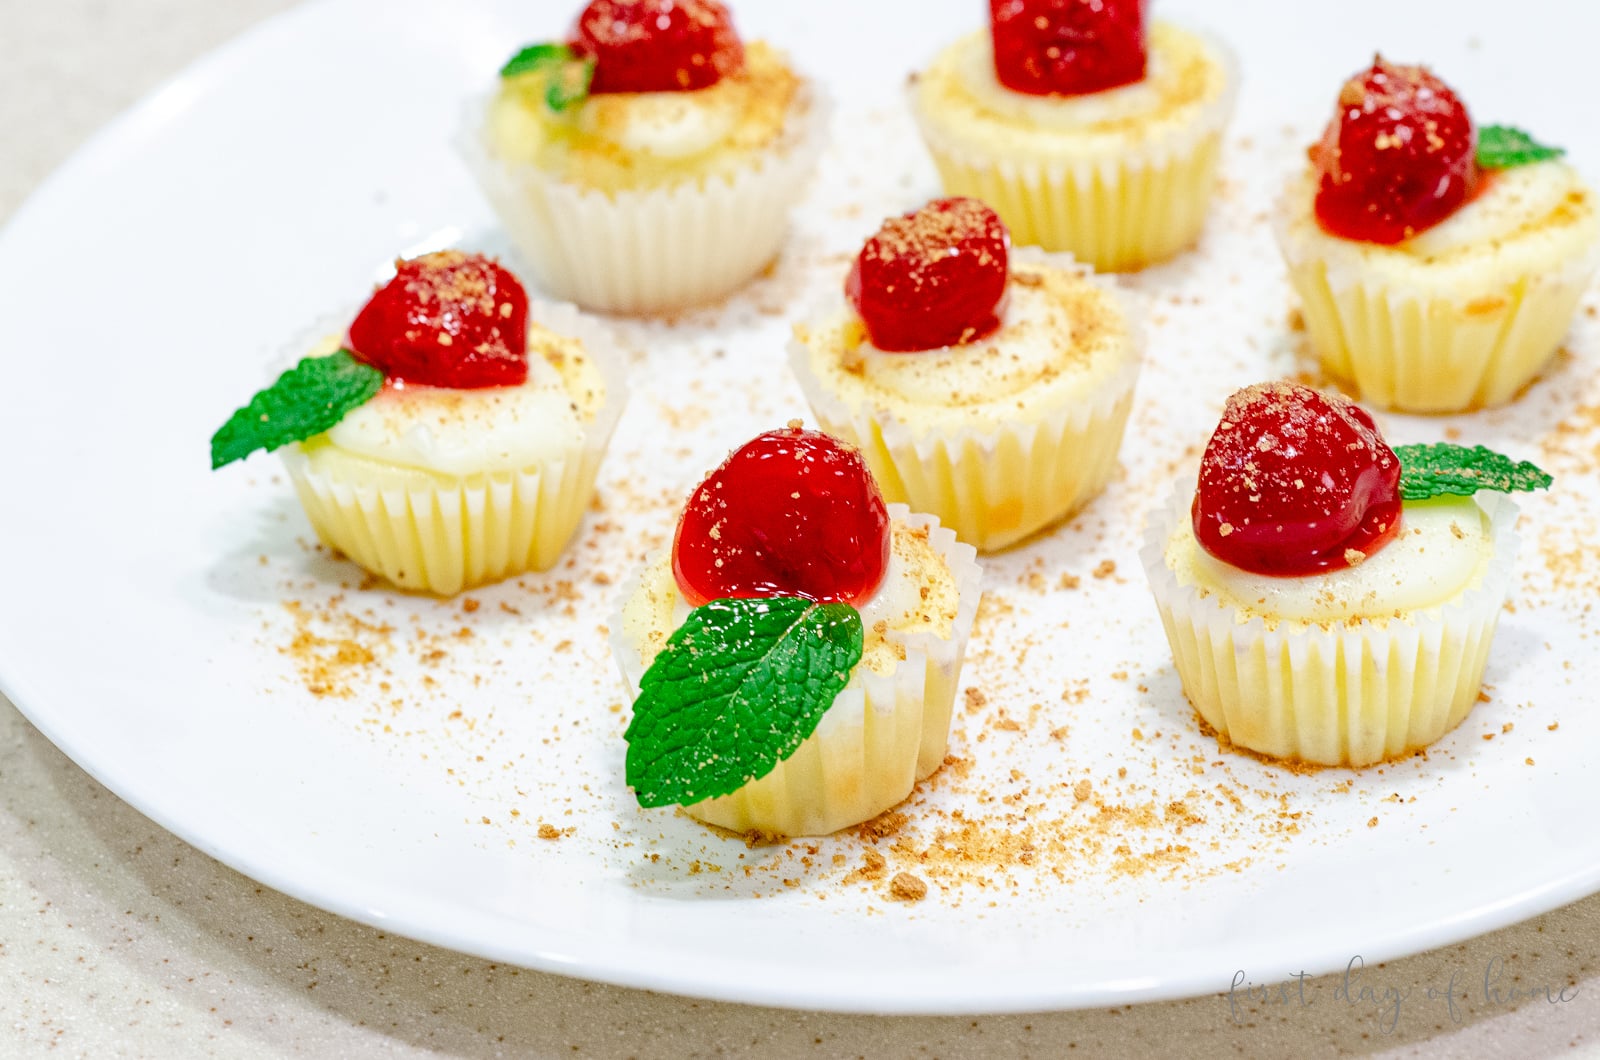 Mini cheesecakes on a plate with cherry topping and mint leaves.